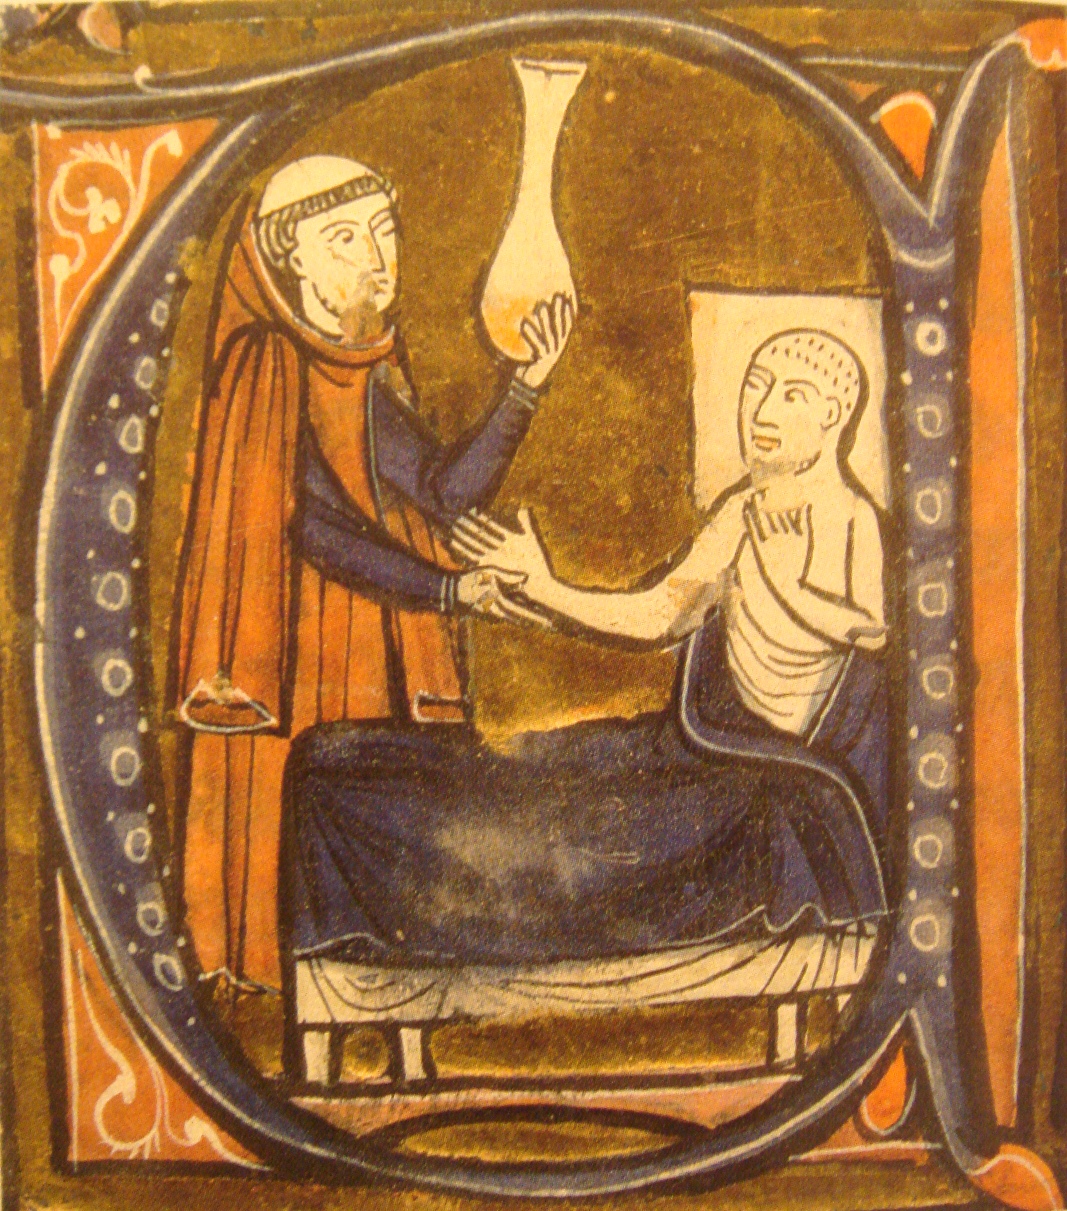 The European image of the Persian physician Al-Razi, holding vessel for urine collection.